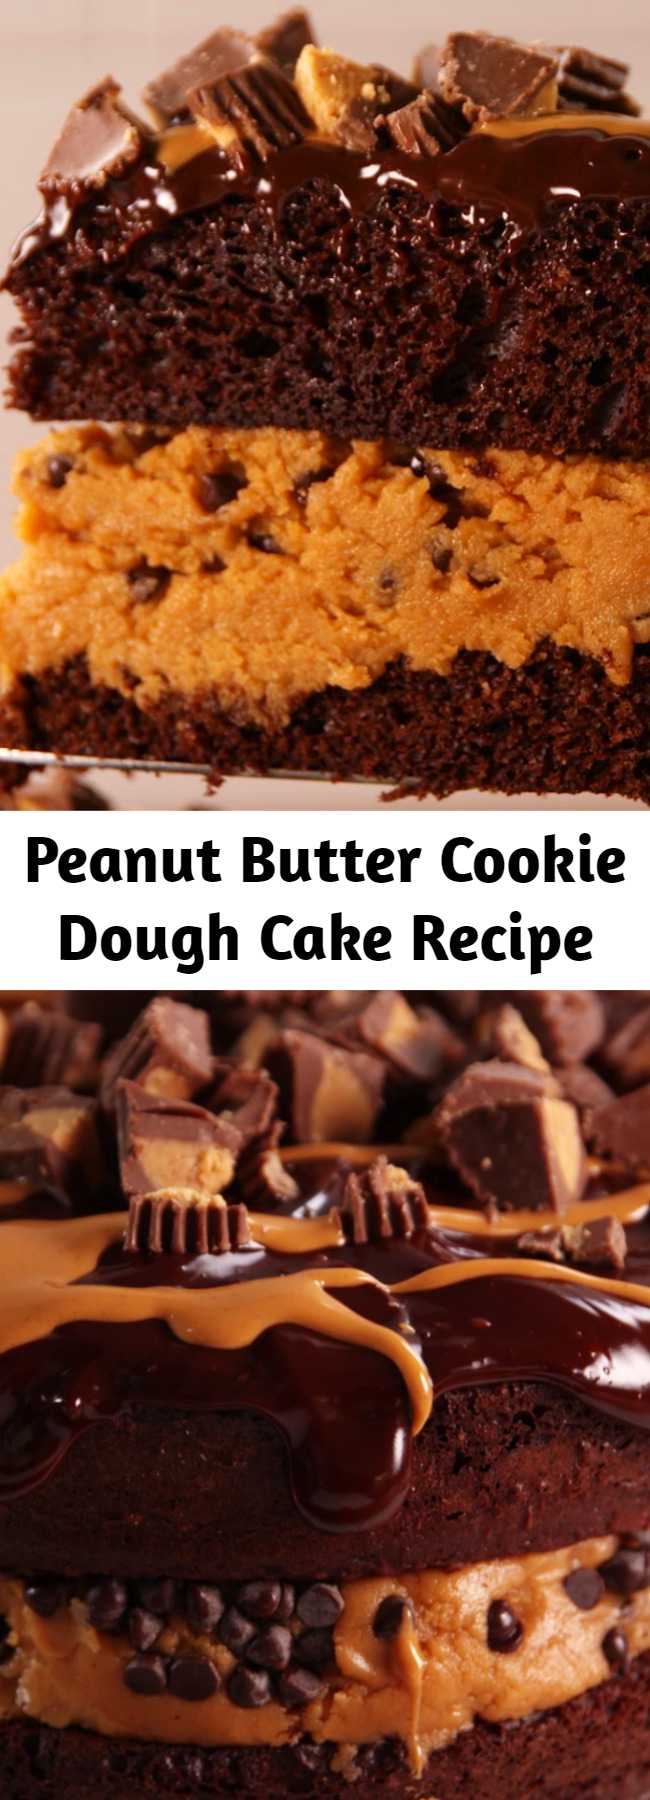 If you like shoveling mounds of cookie dough into your face, you're going to love this cake.